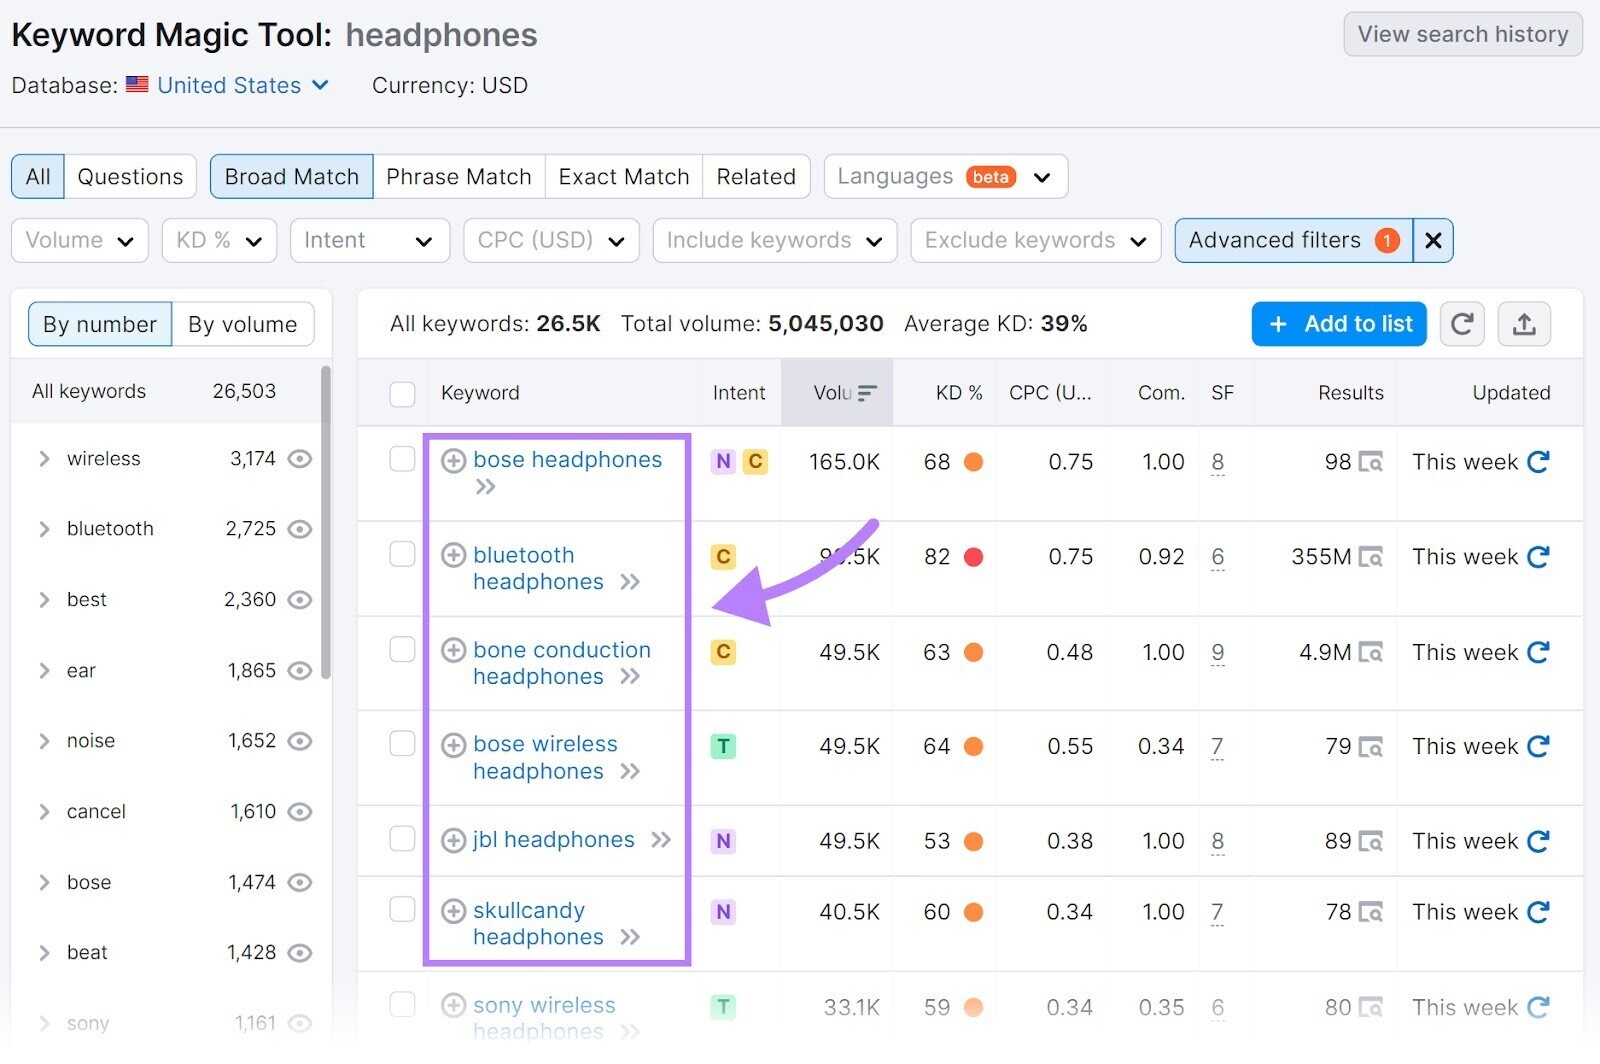 Filtered results for "headphones" in Keyword Magic Tool